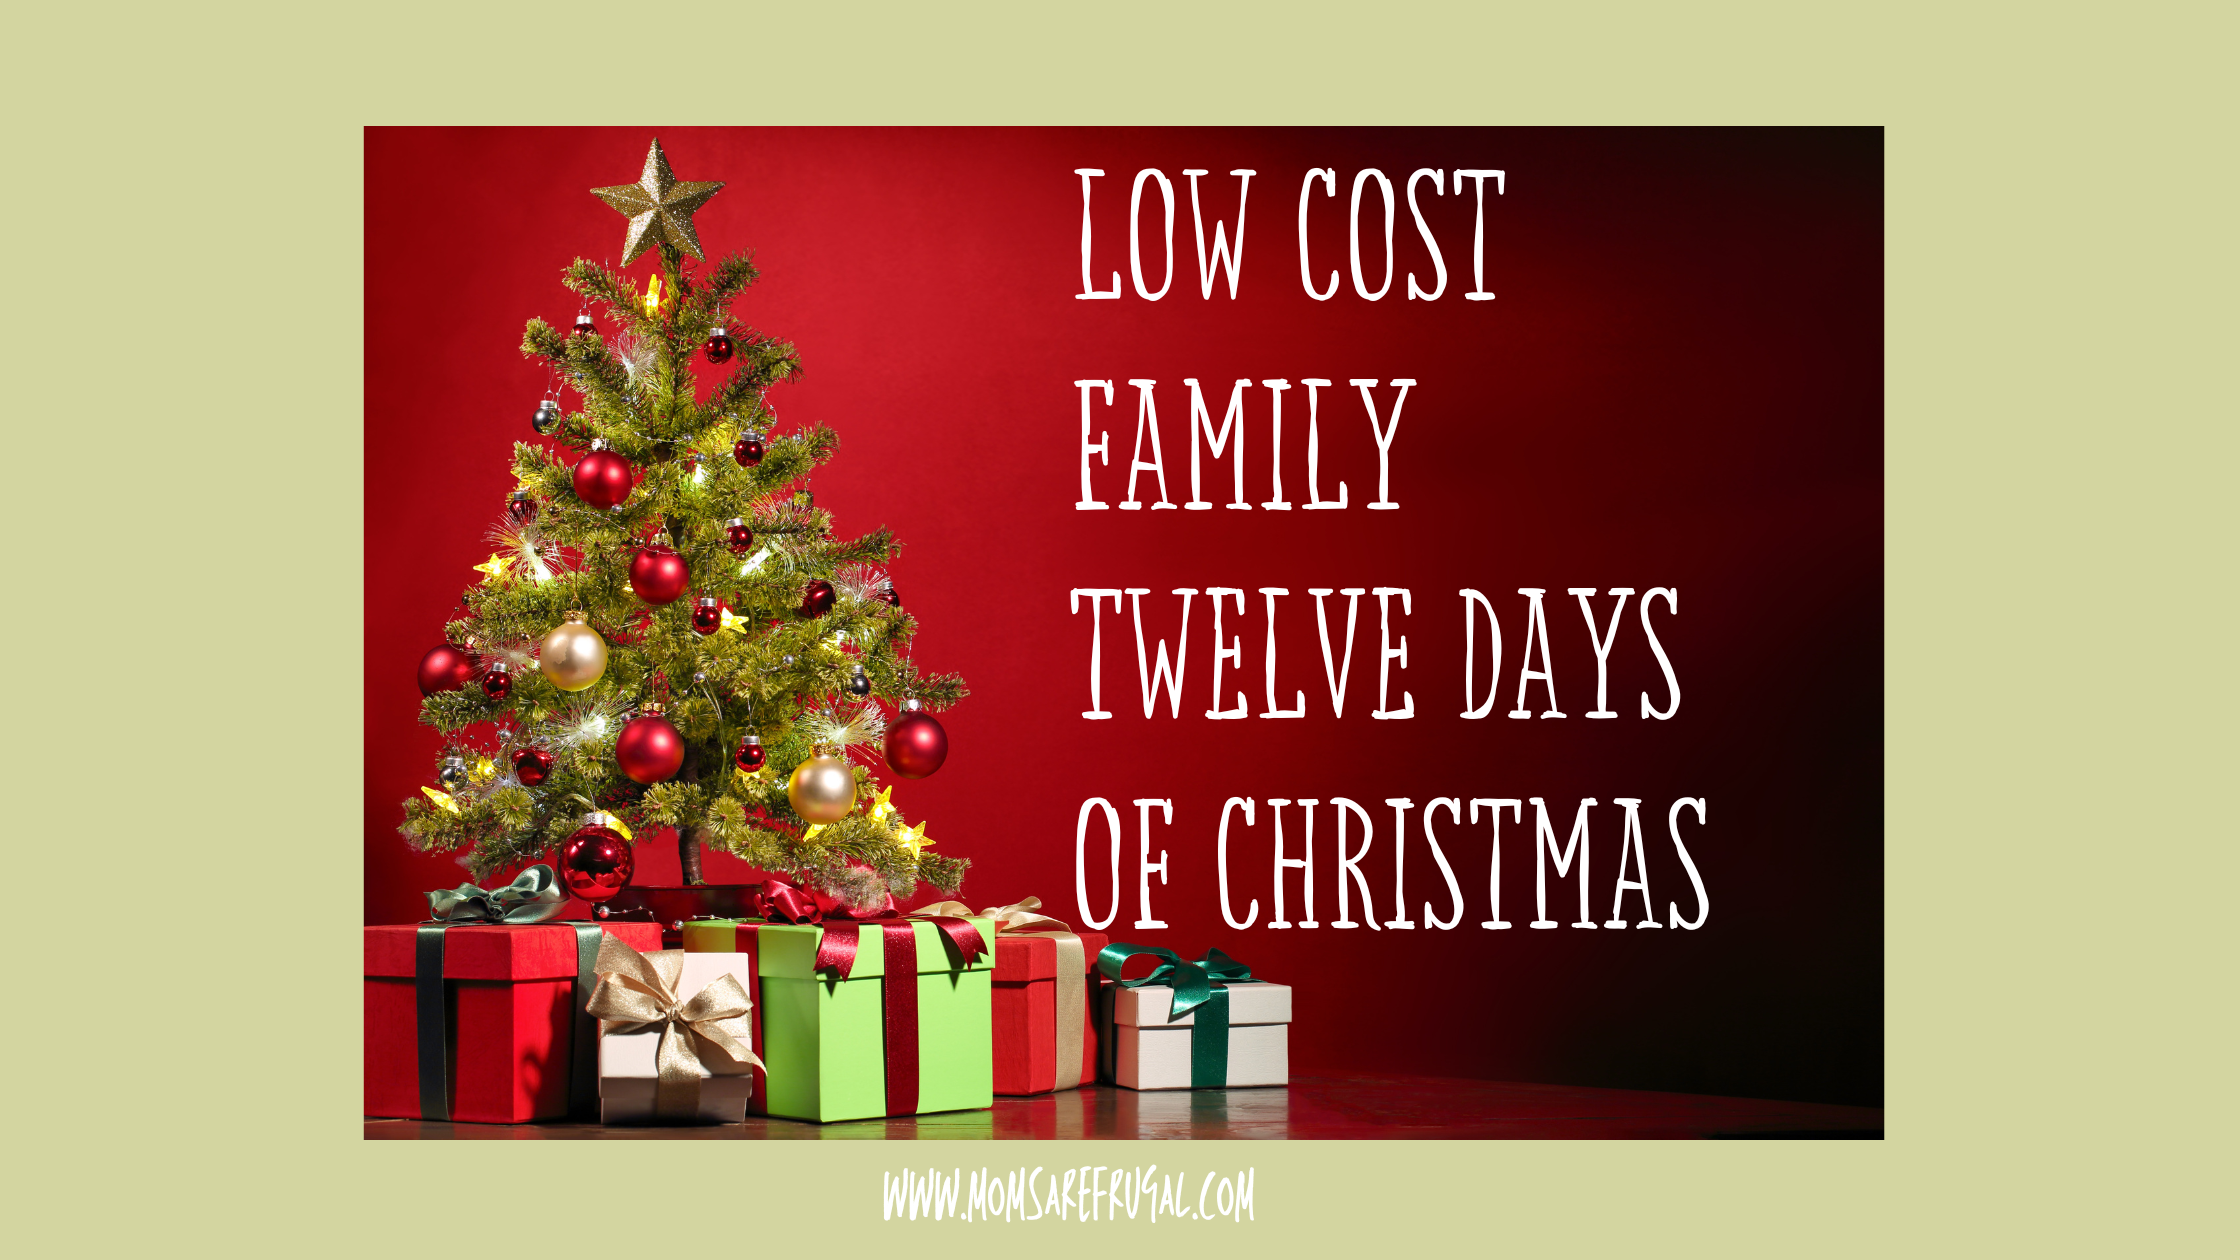 Low Cost Family Twelve Days of Christmas